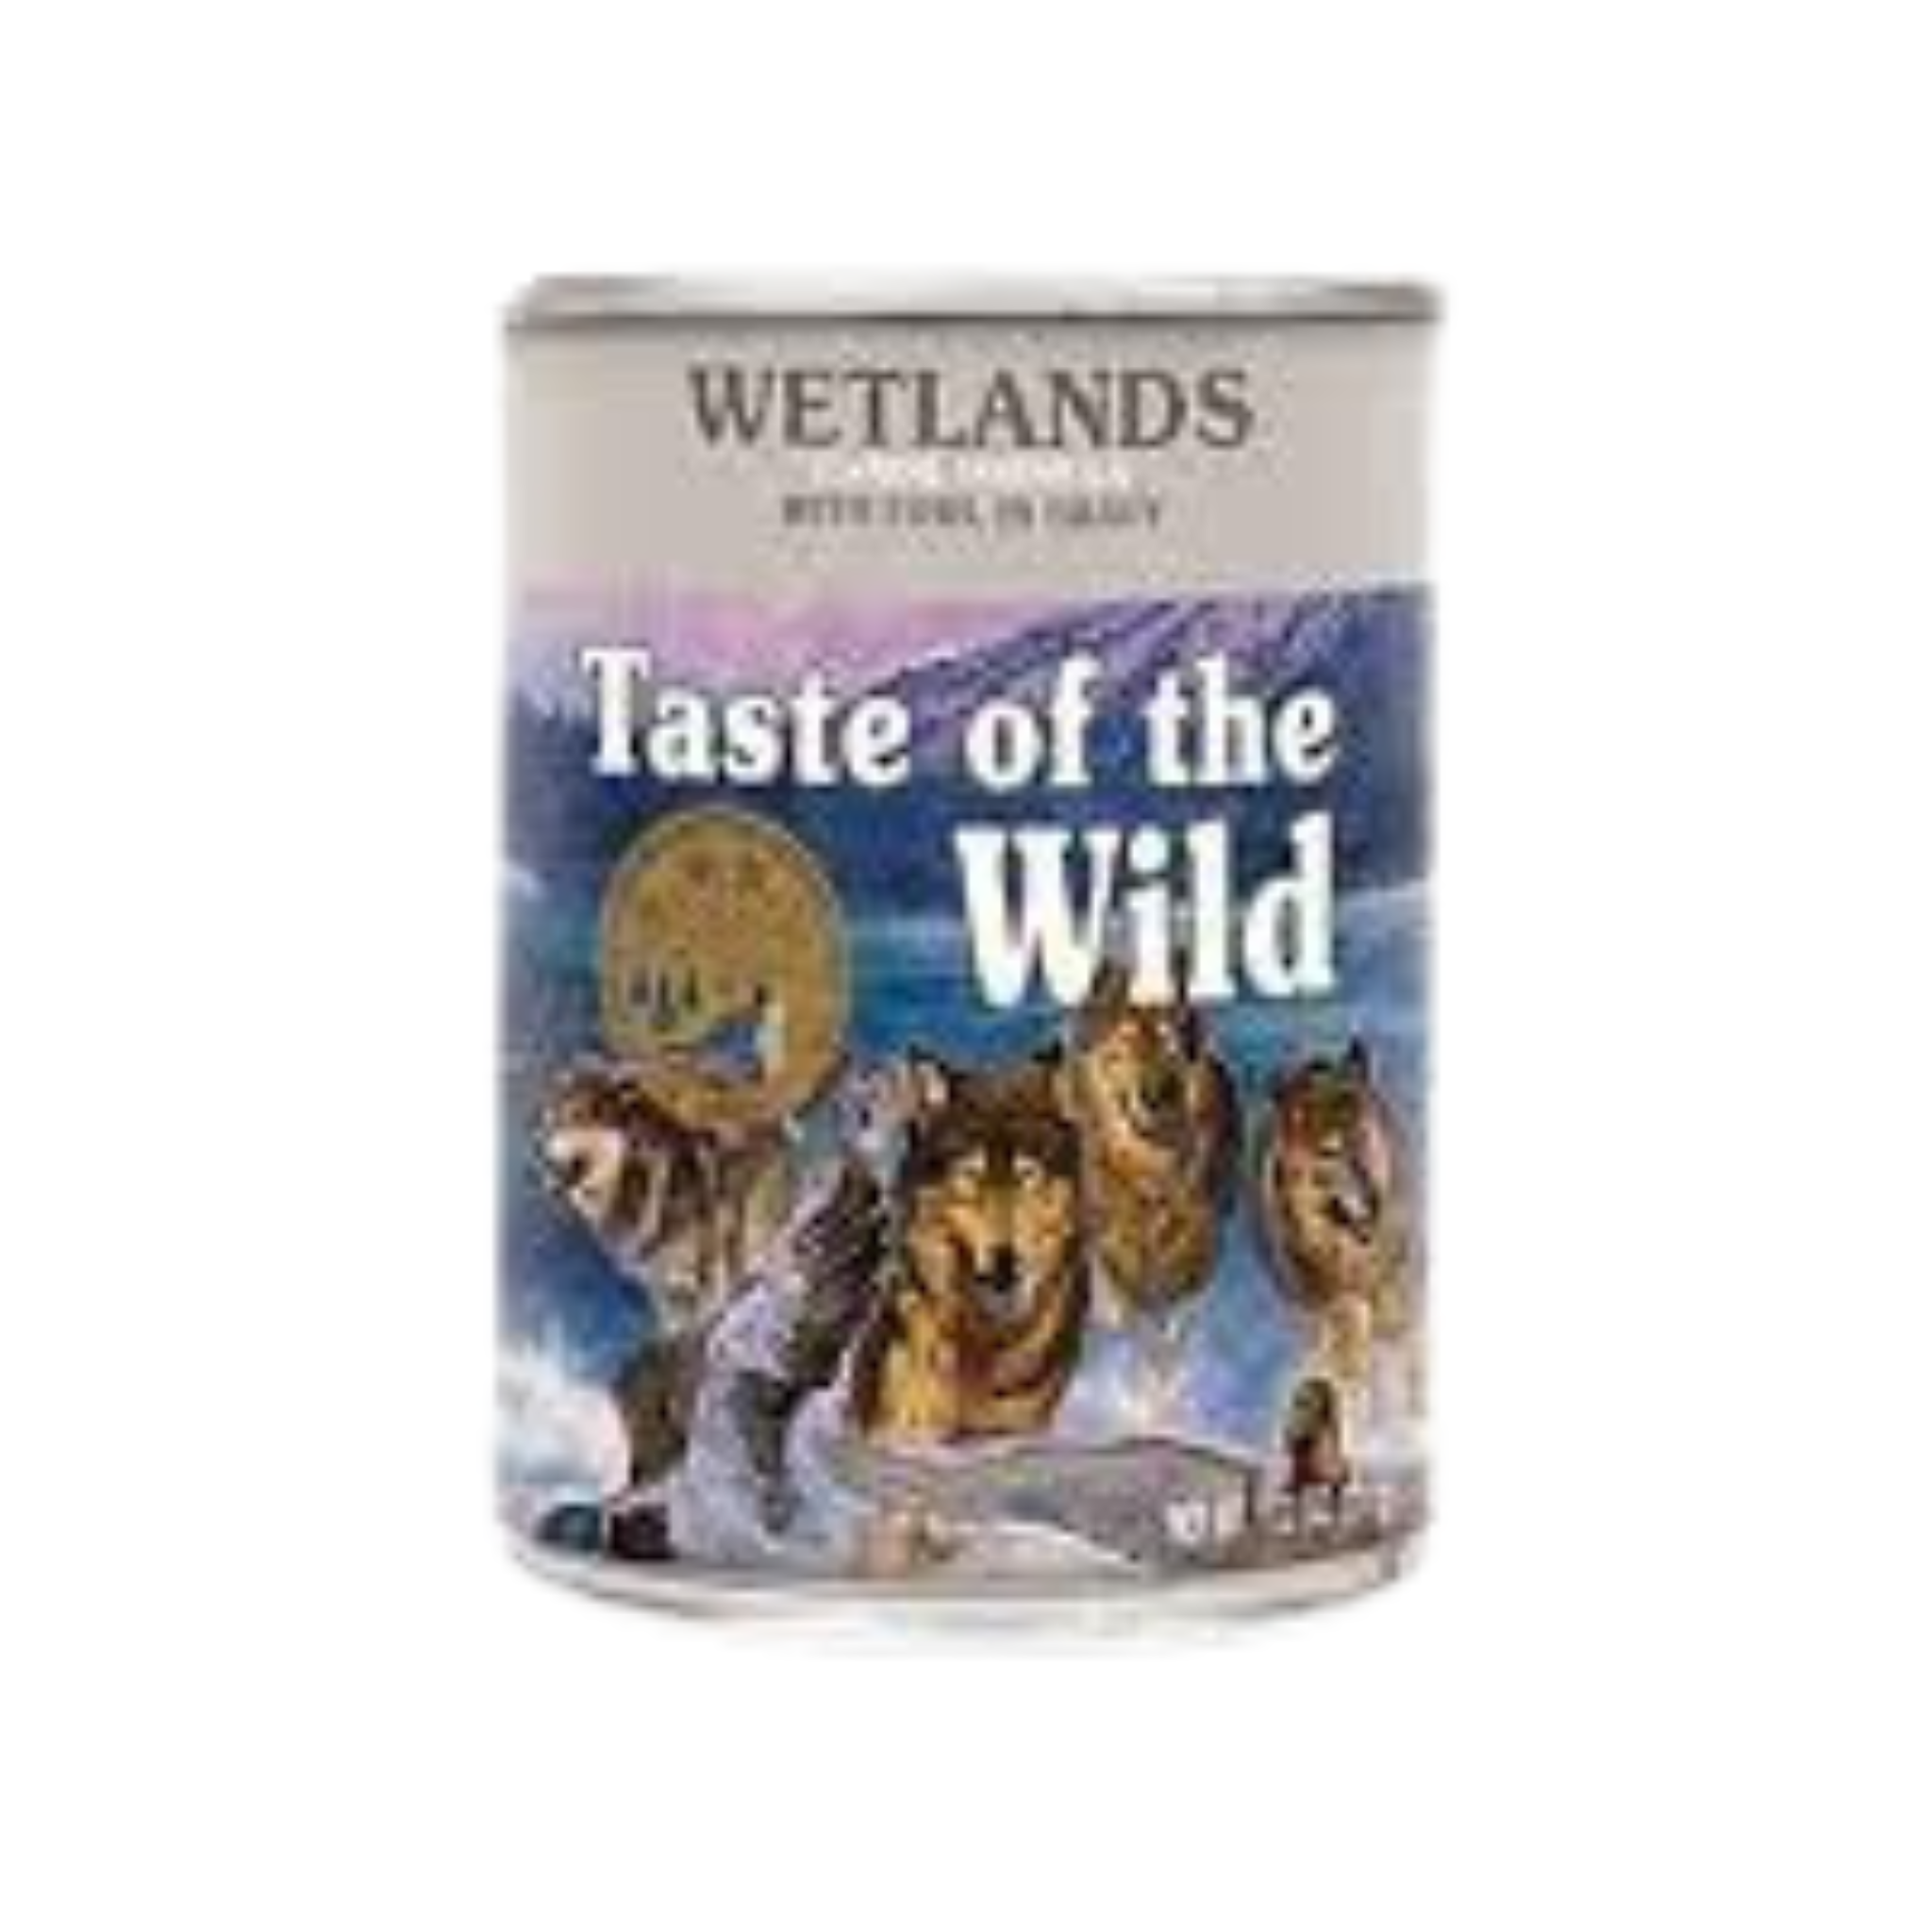 Taste of the Wild Wetlands Dog Canned